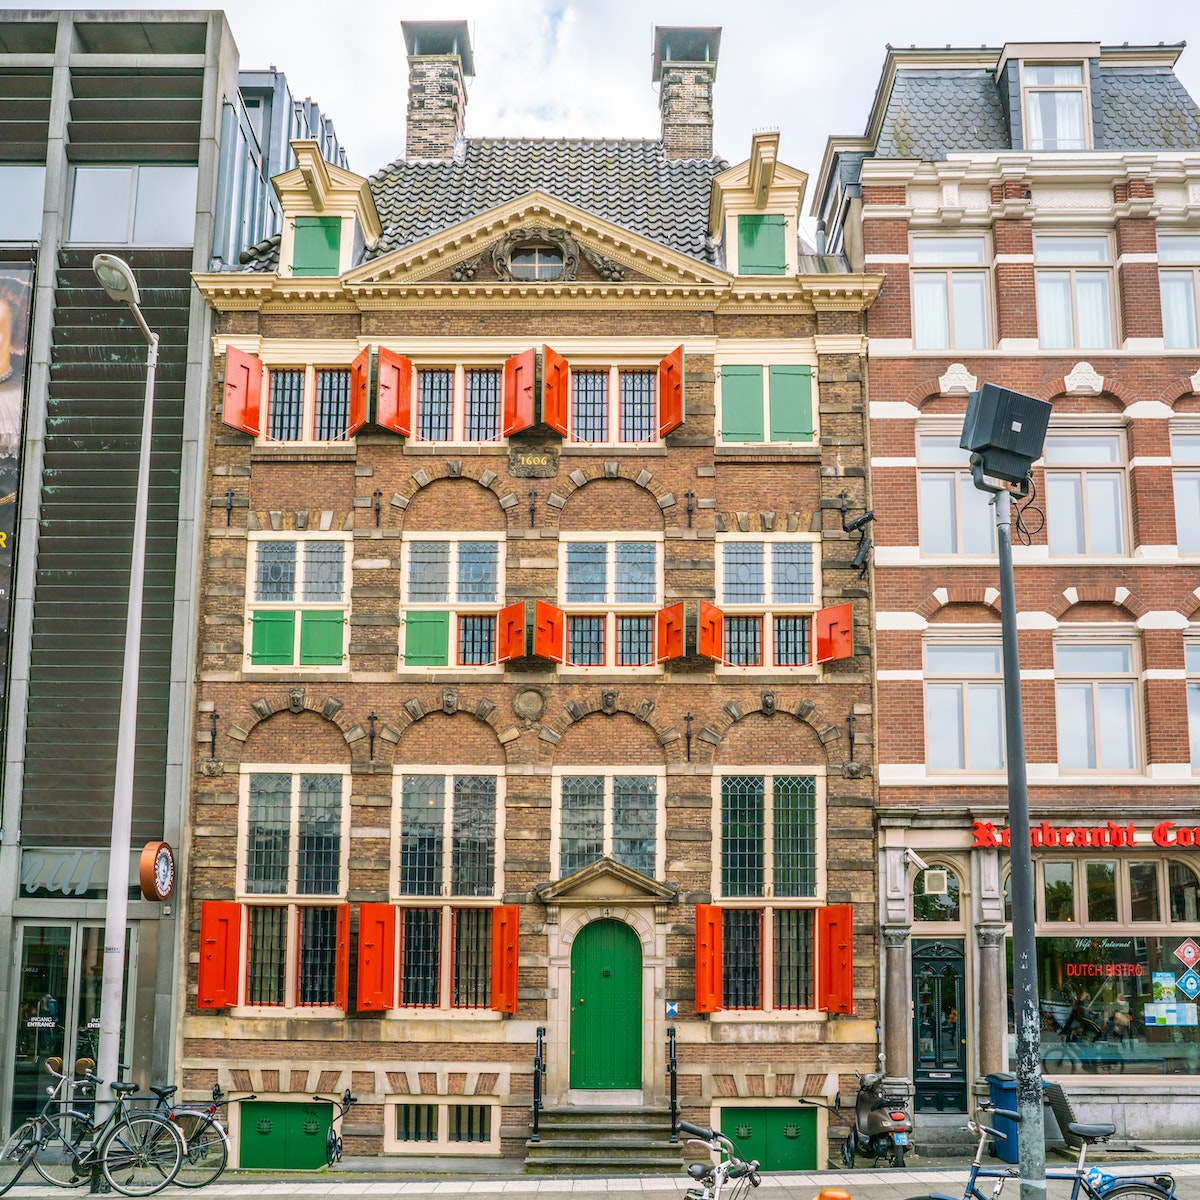 May 18, 2018: Exterior of the Rembrandt House Museum in the old Jewish quarter of Amsterdam.